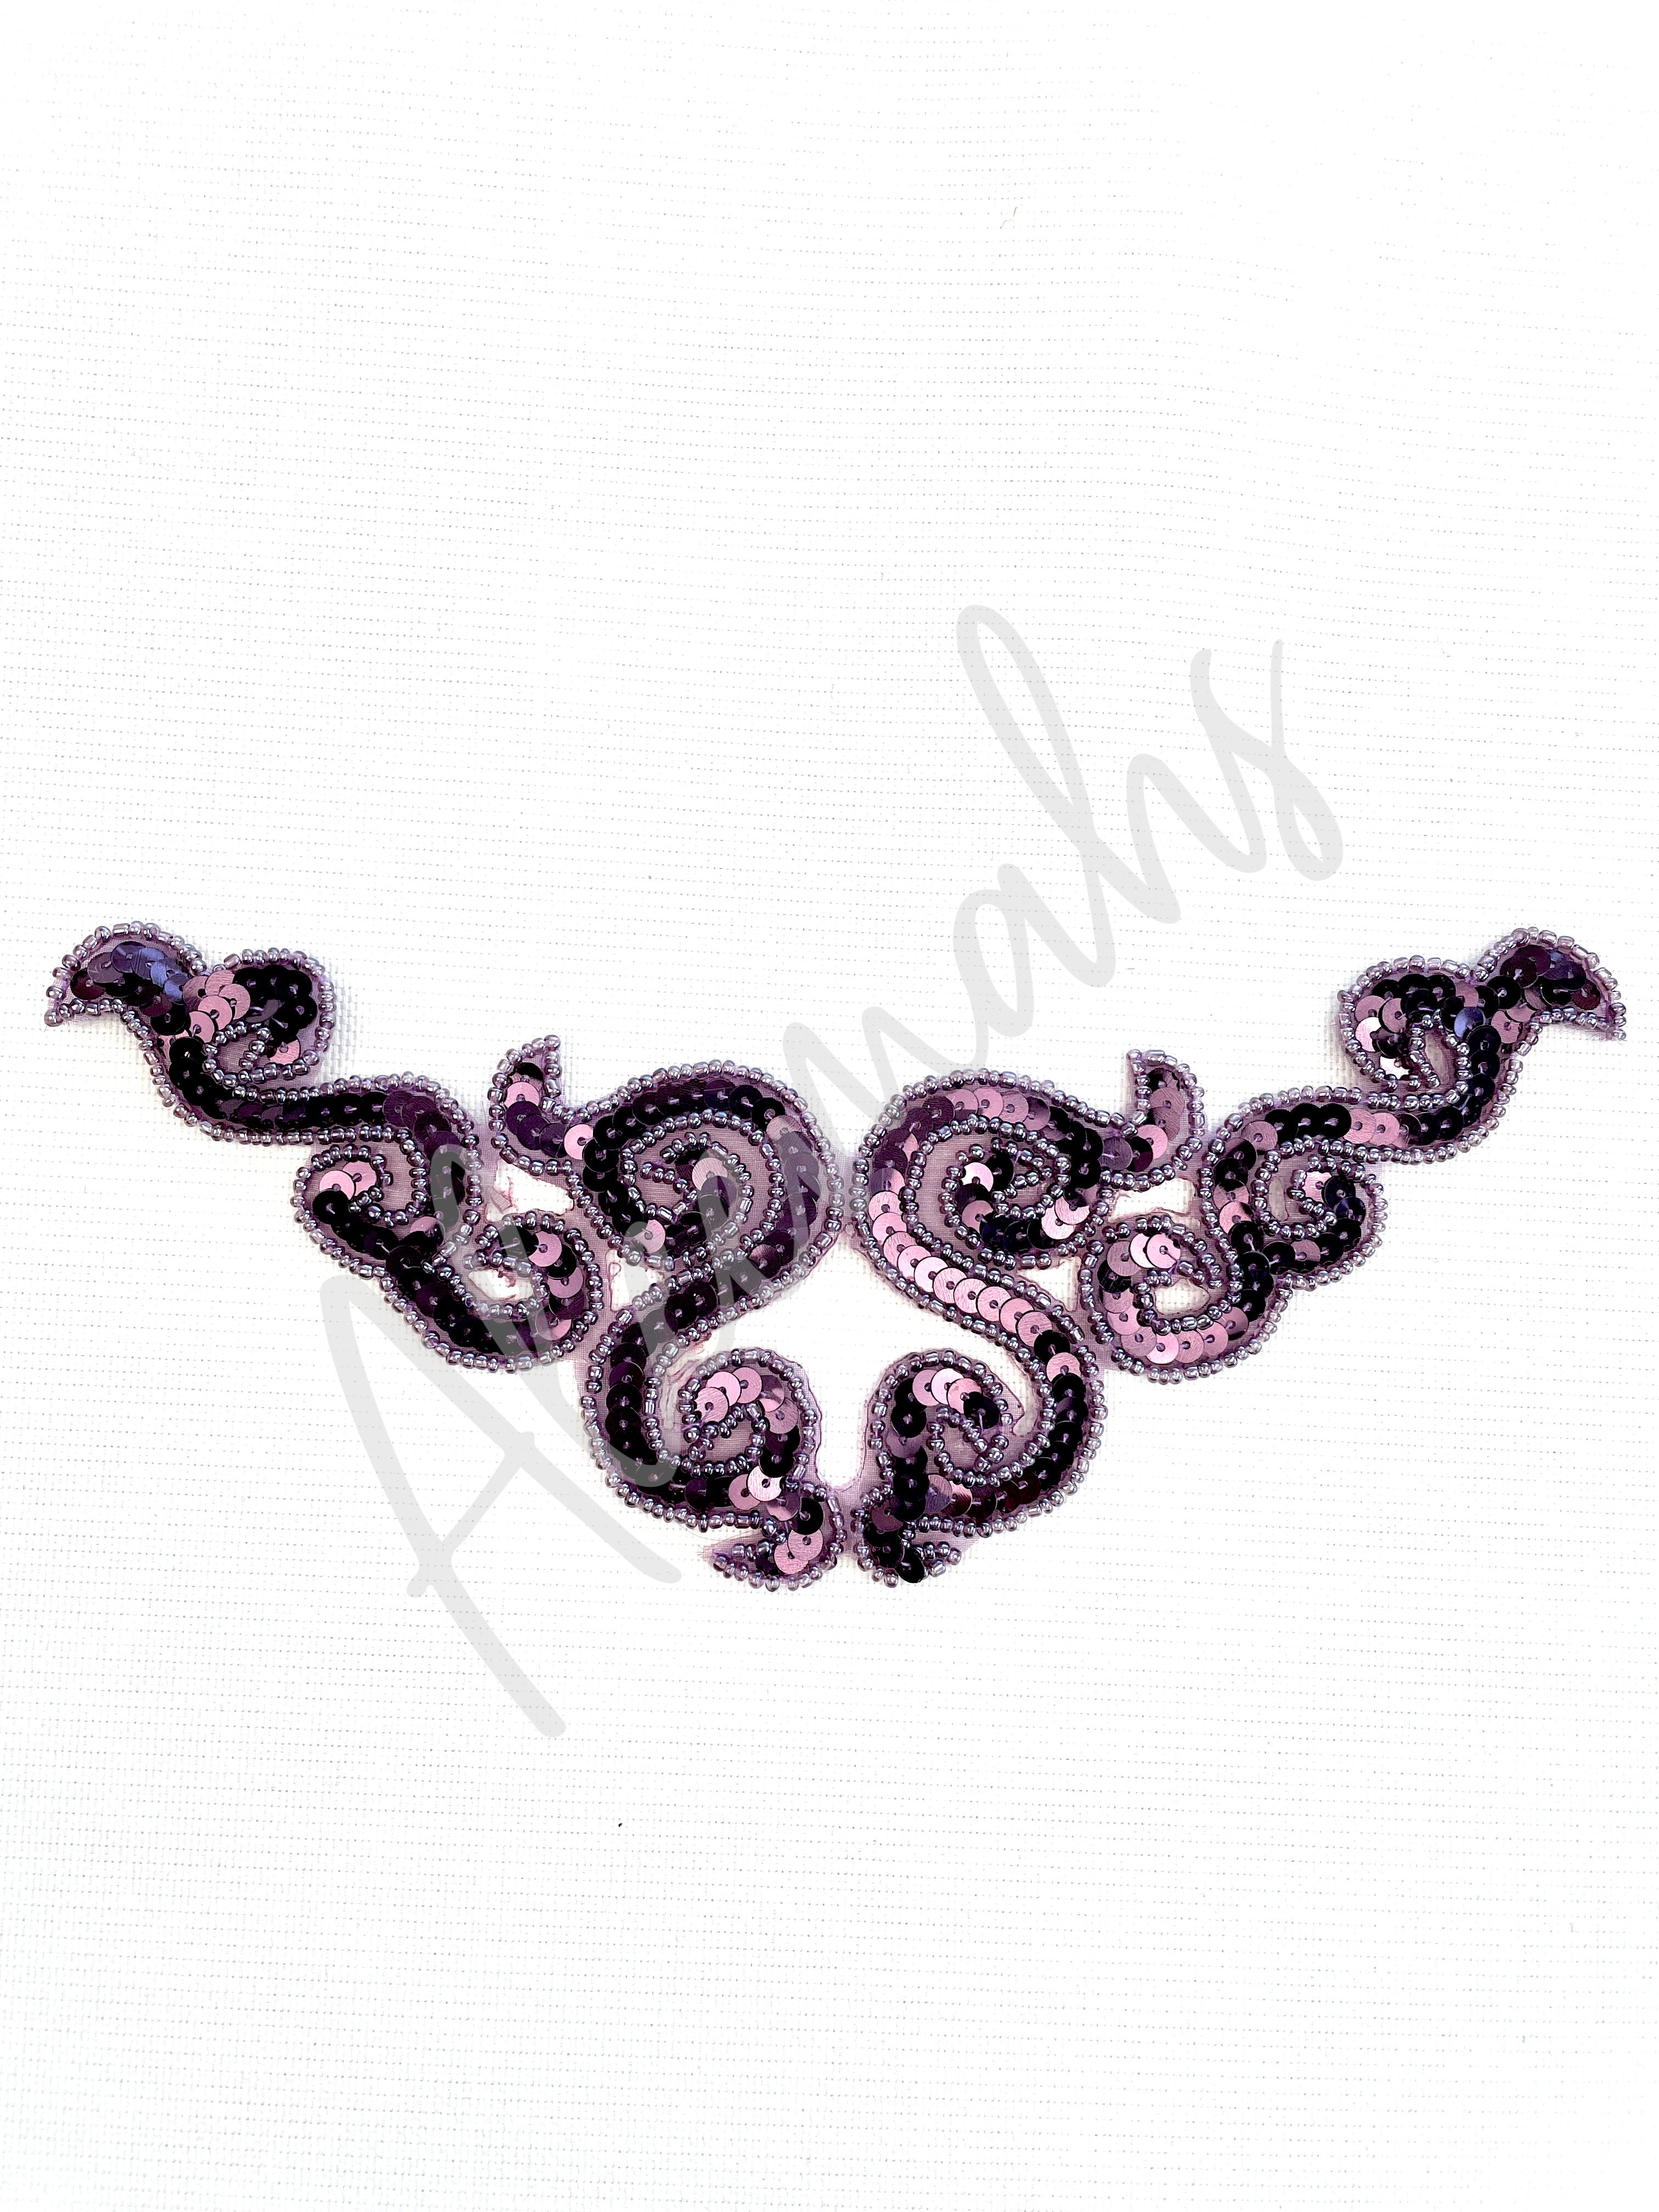 A-107: Old Mauve sequin and bead applique